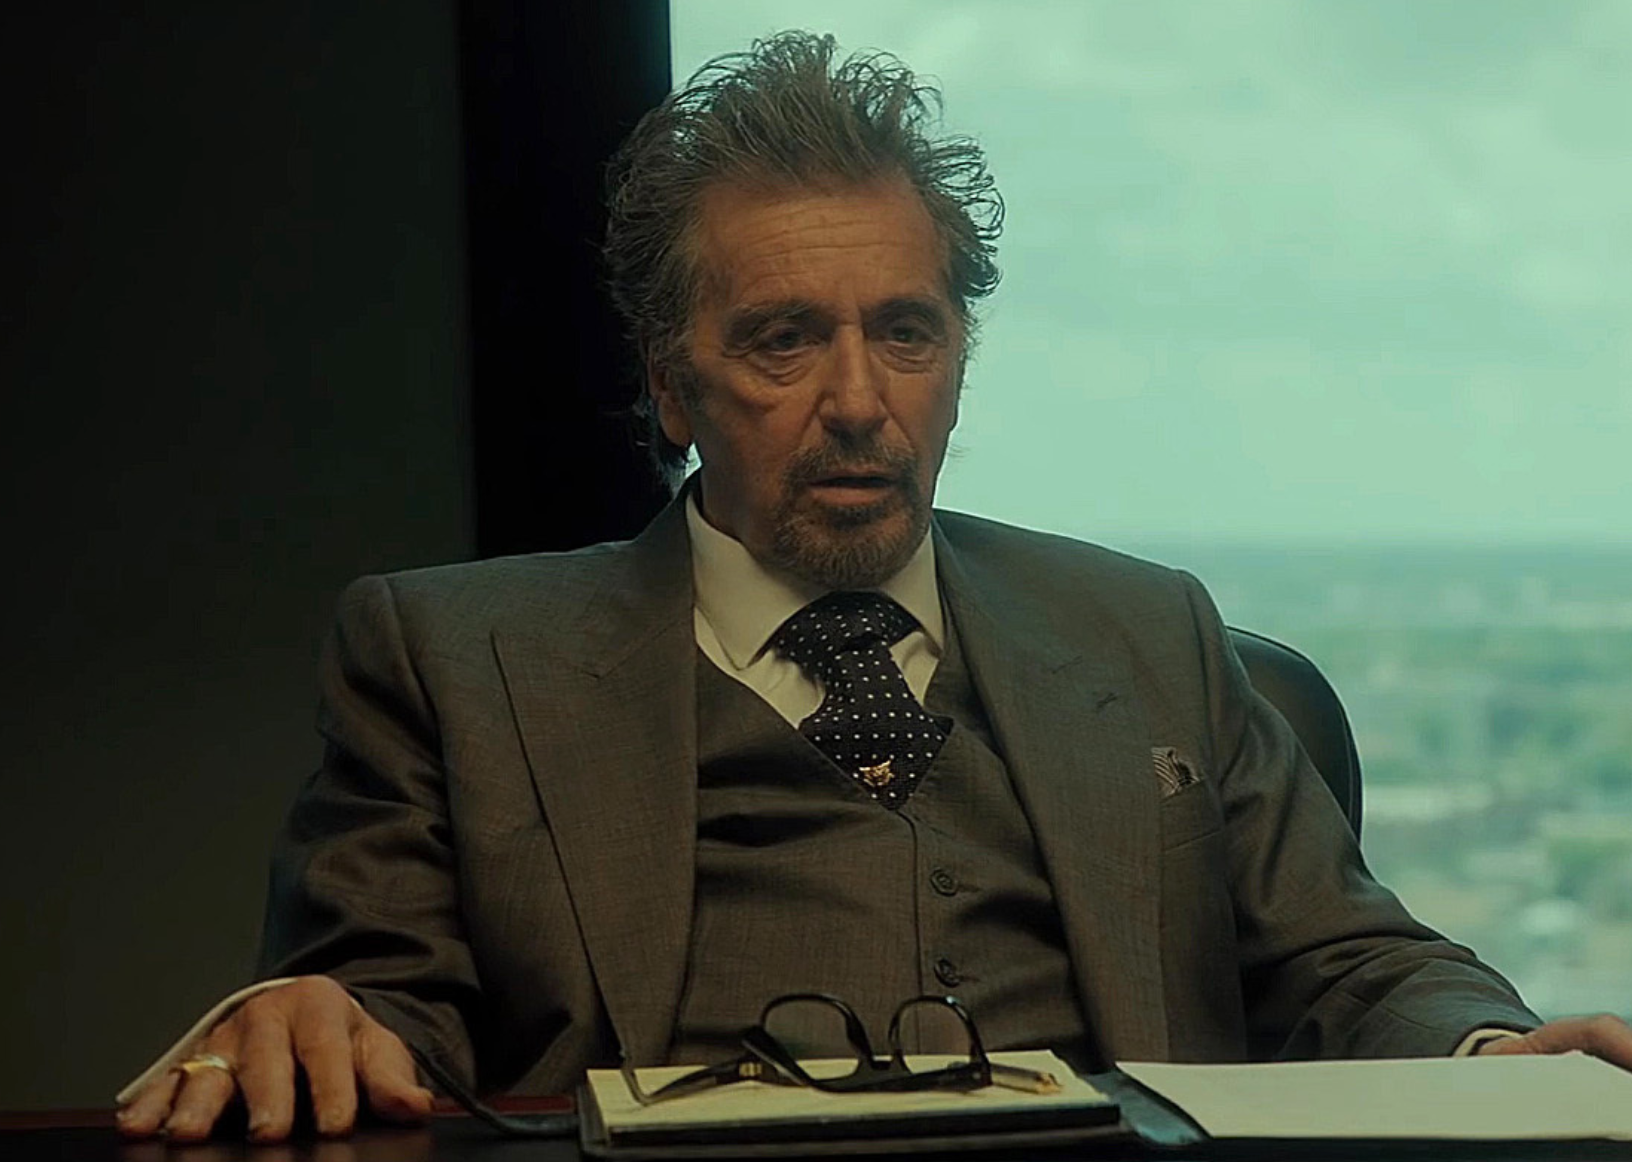 Al Pacino in a scene from ‘Misconduct’